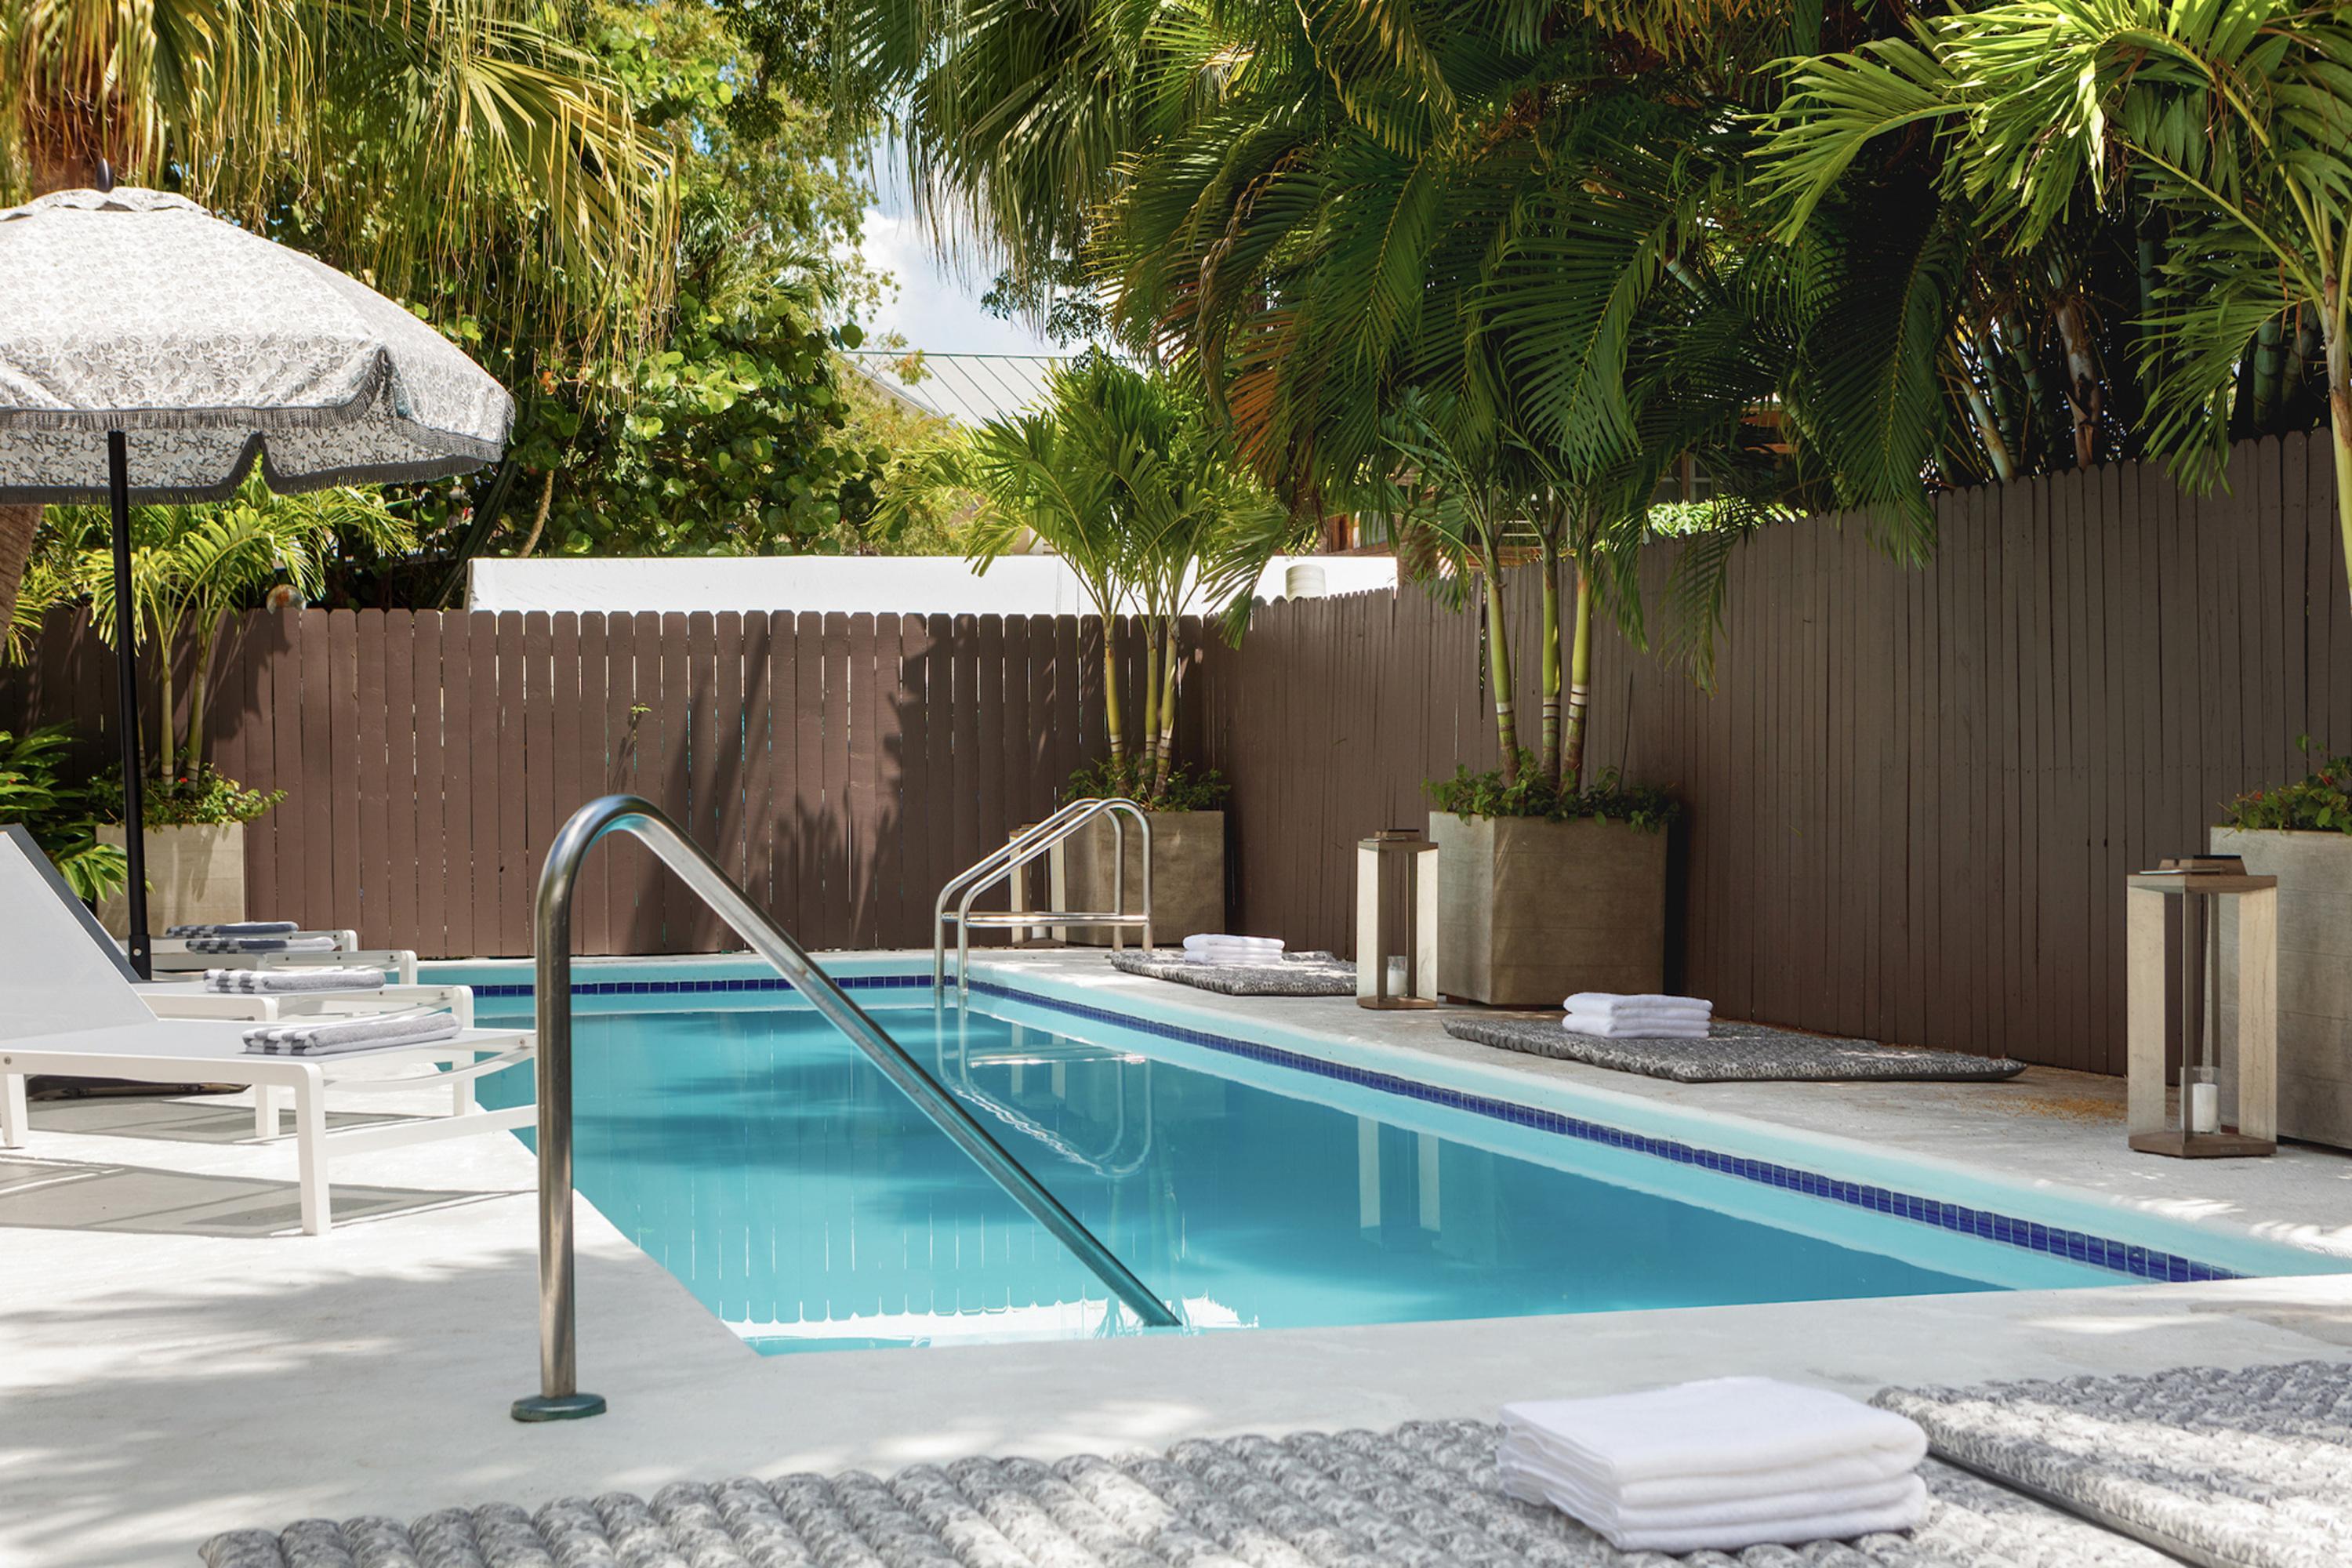 Ridley House - Key West Historic Inns (Adults Only) Экстерьер фото